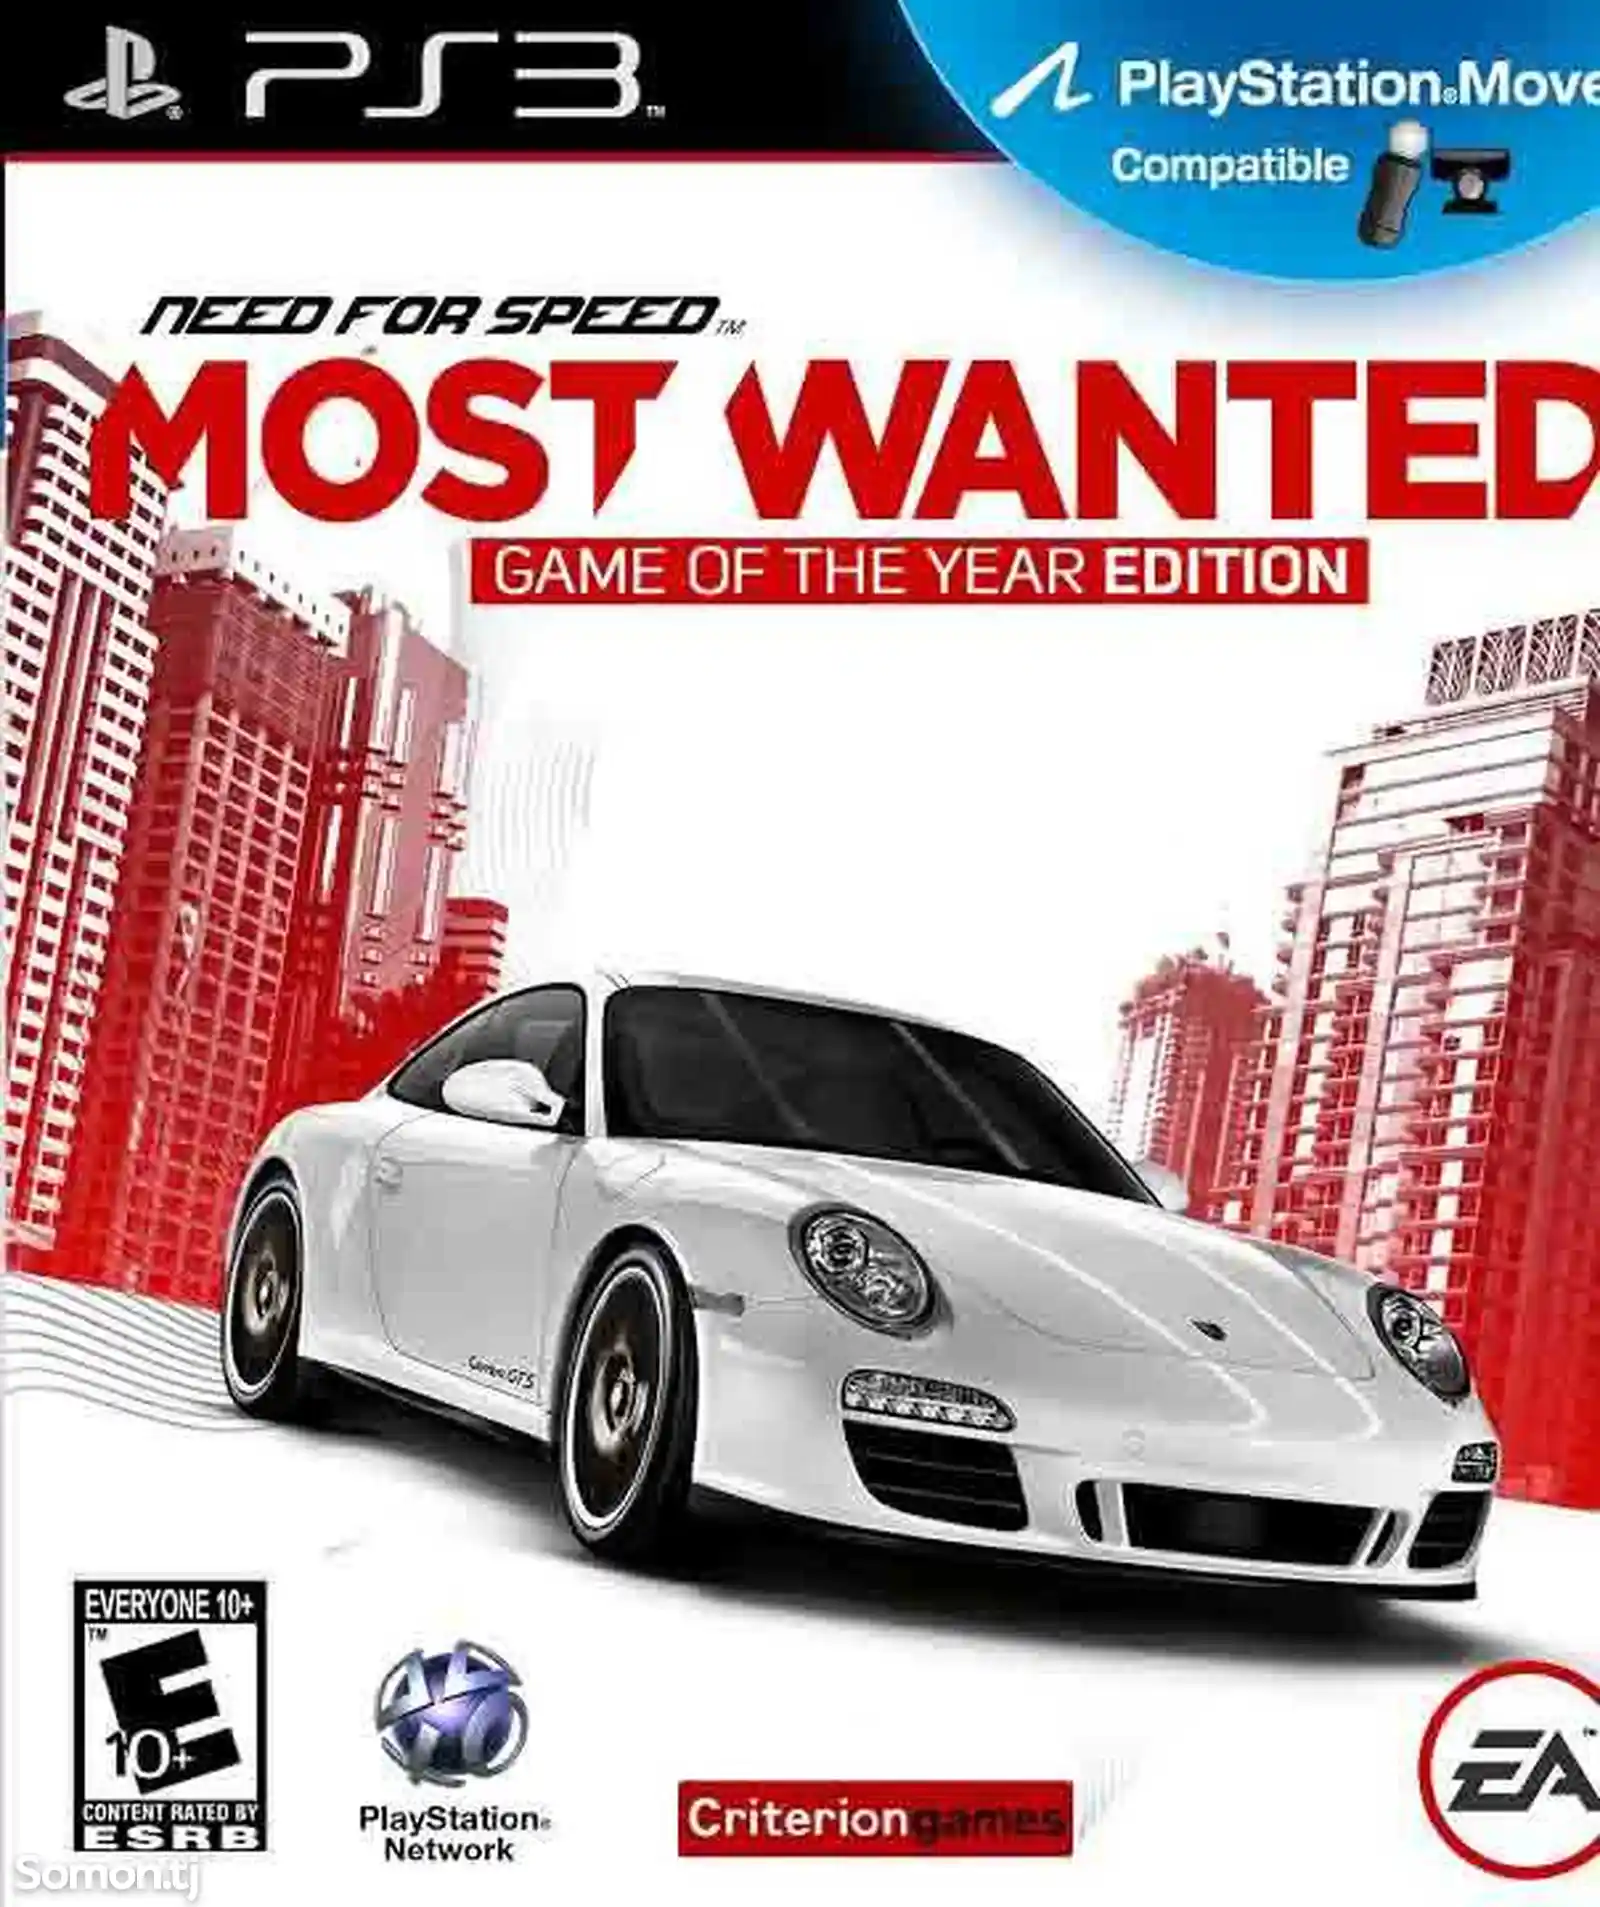 Игра Need For Speed Most Wanted на всех моделей Play Station-3